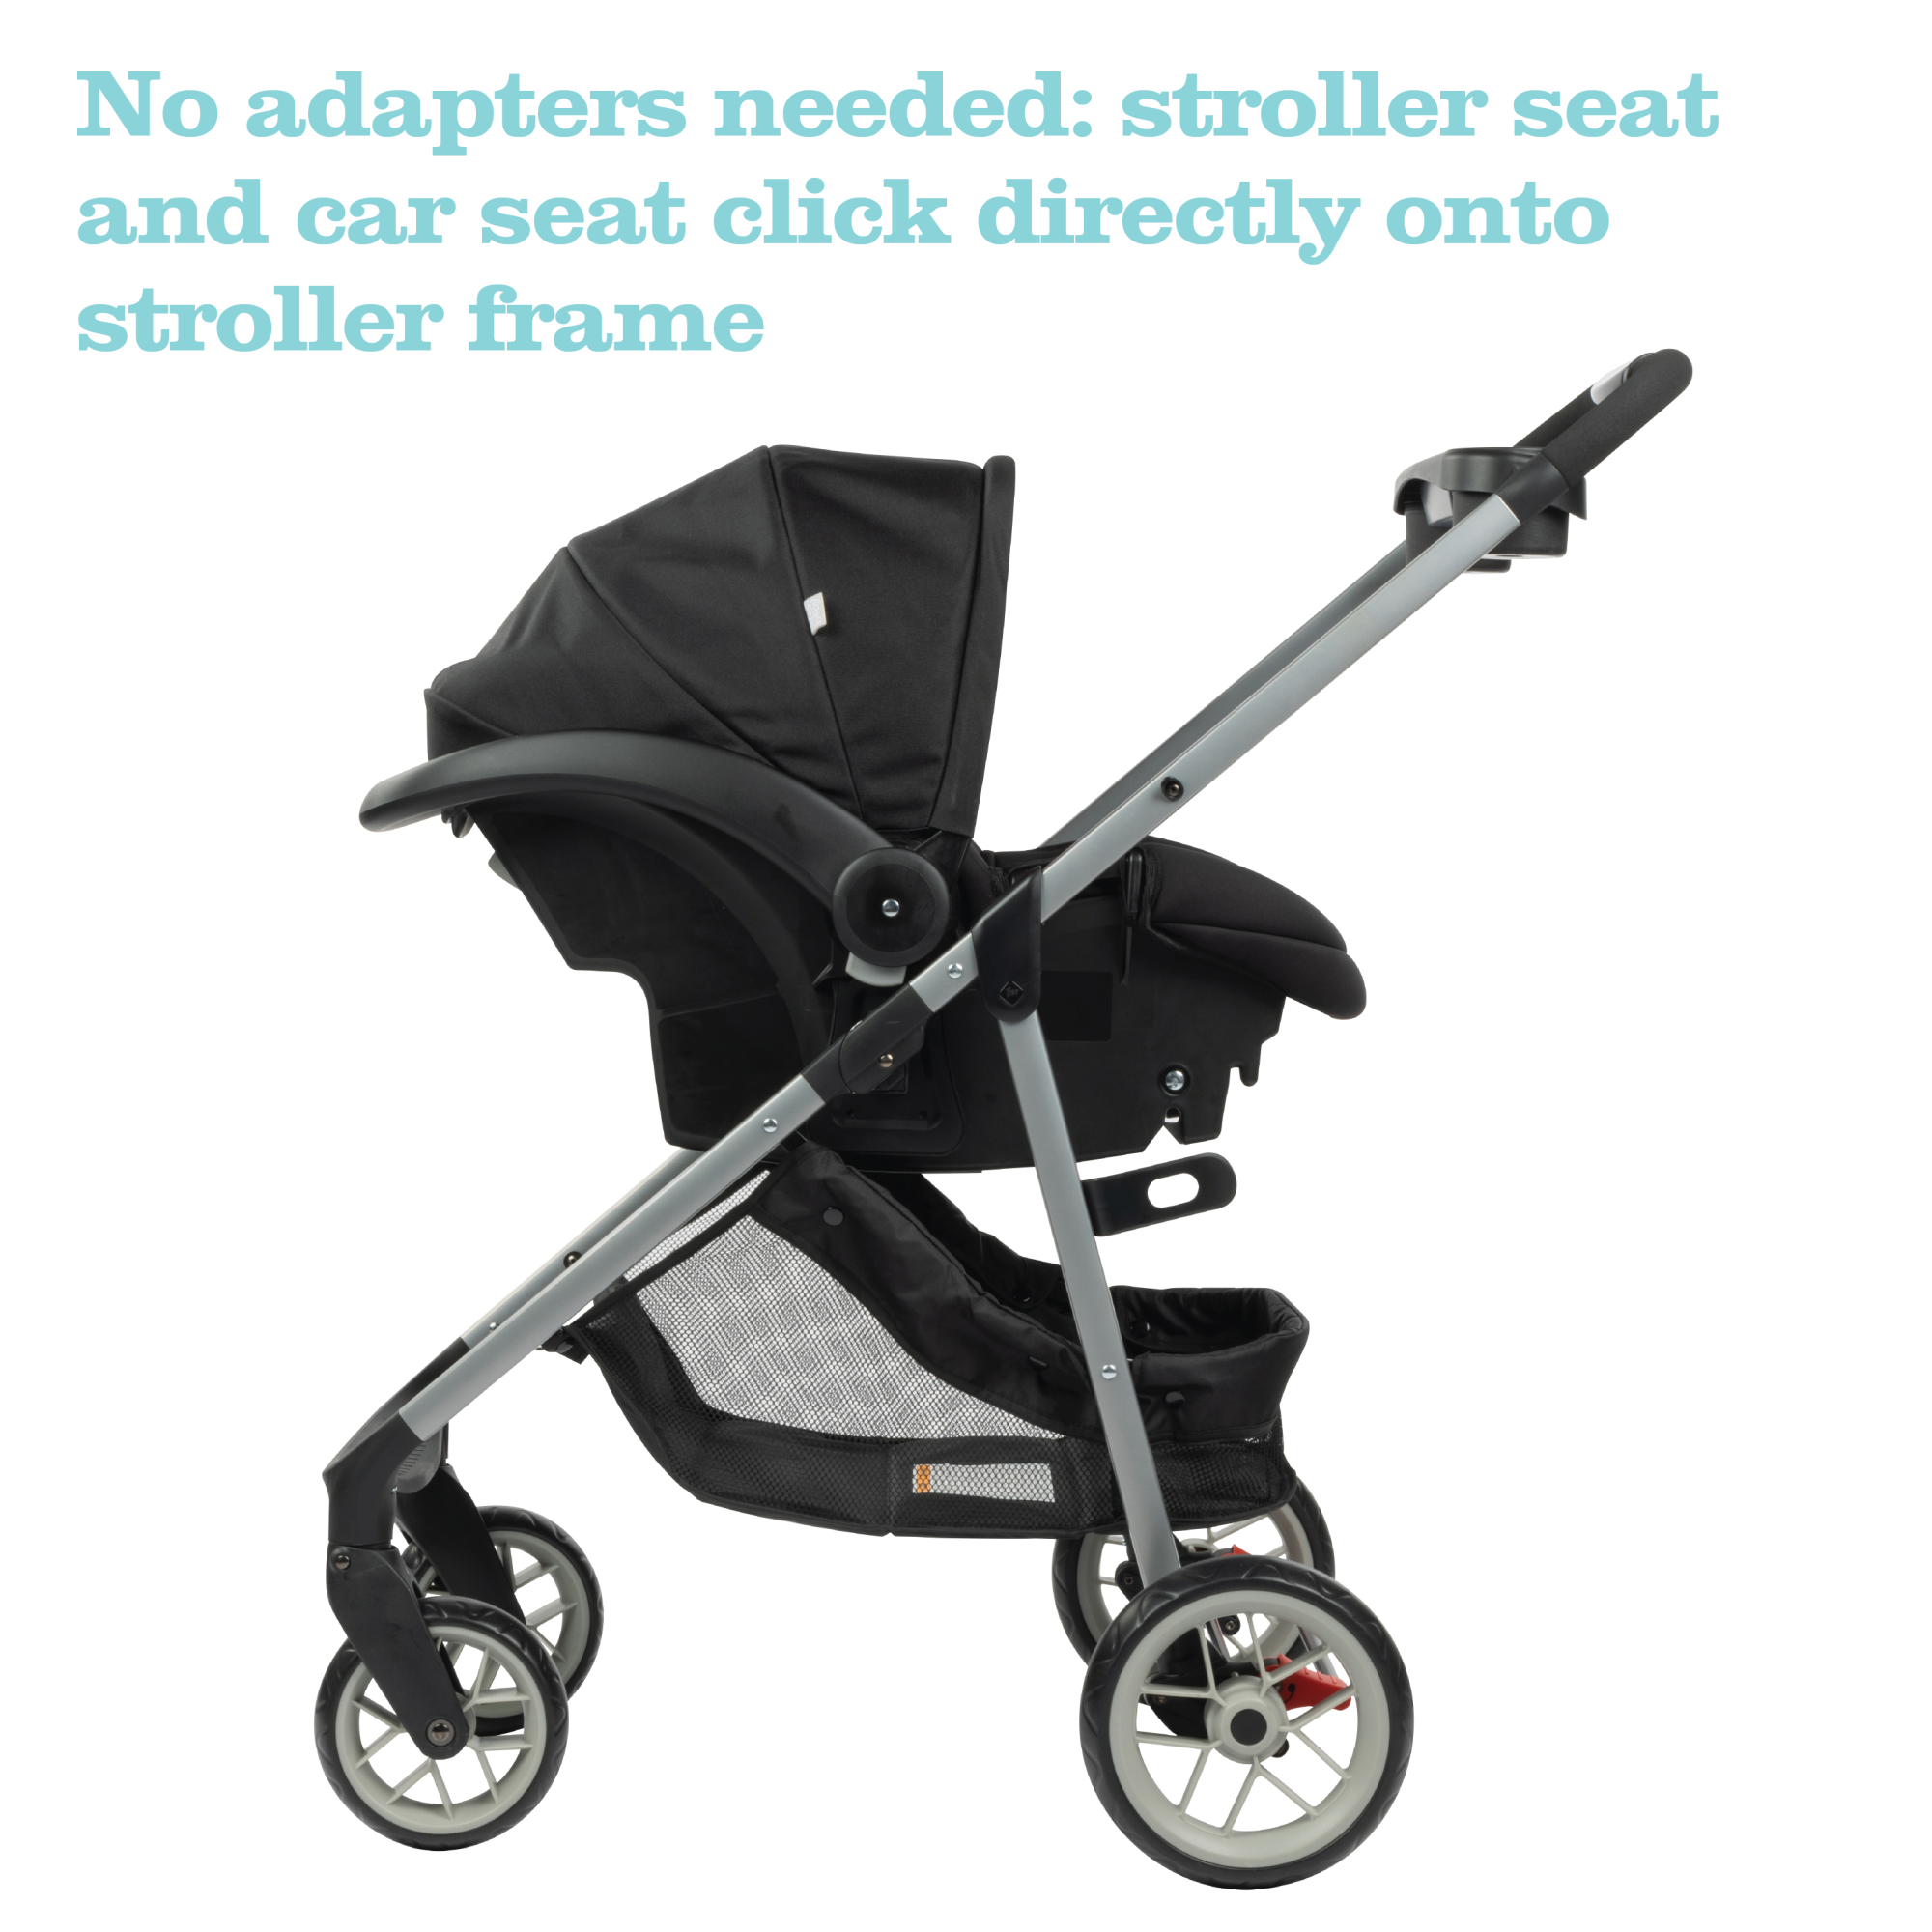 Disney Baby Grow and Go™ Modular Travel System - meets Disney size requirements